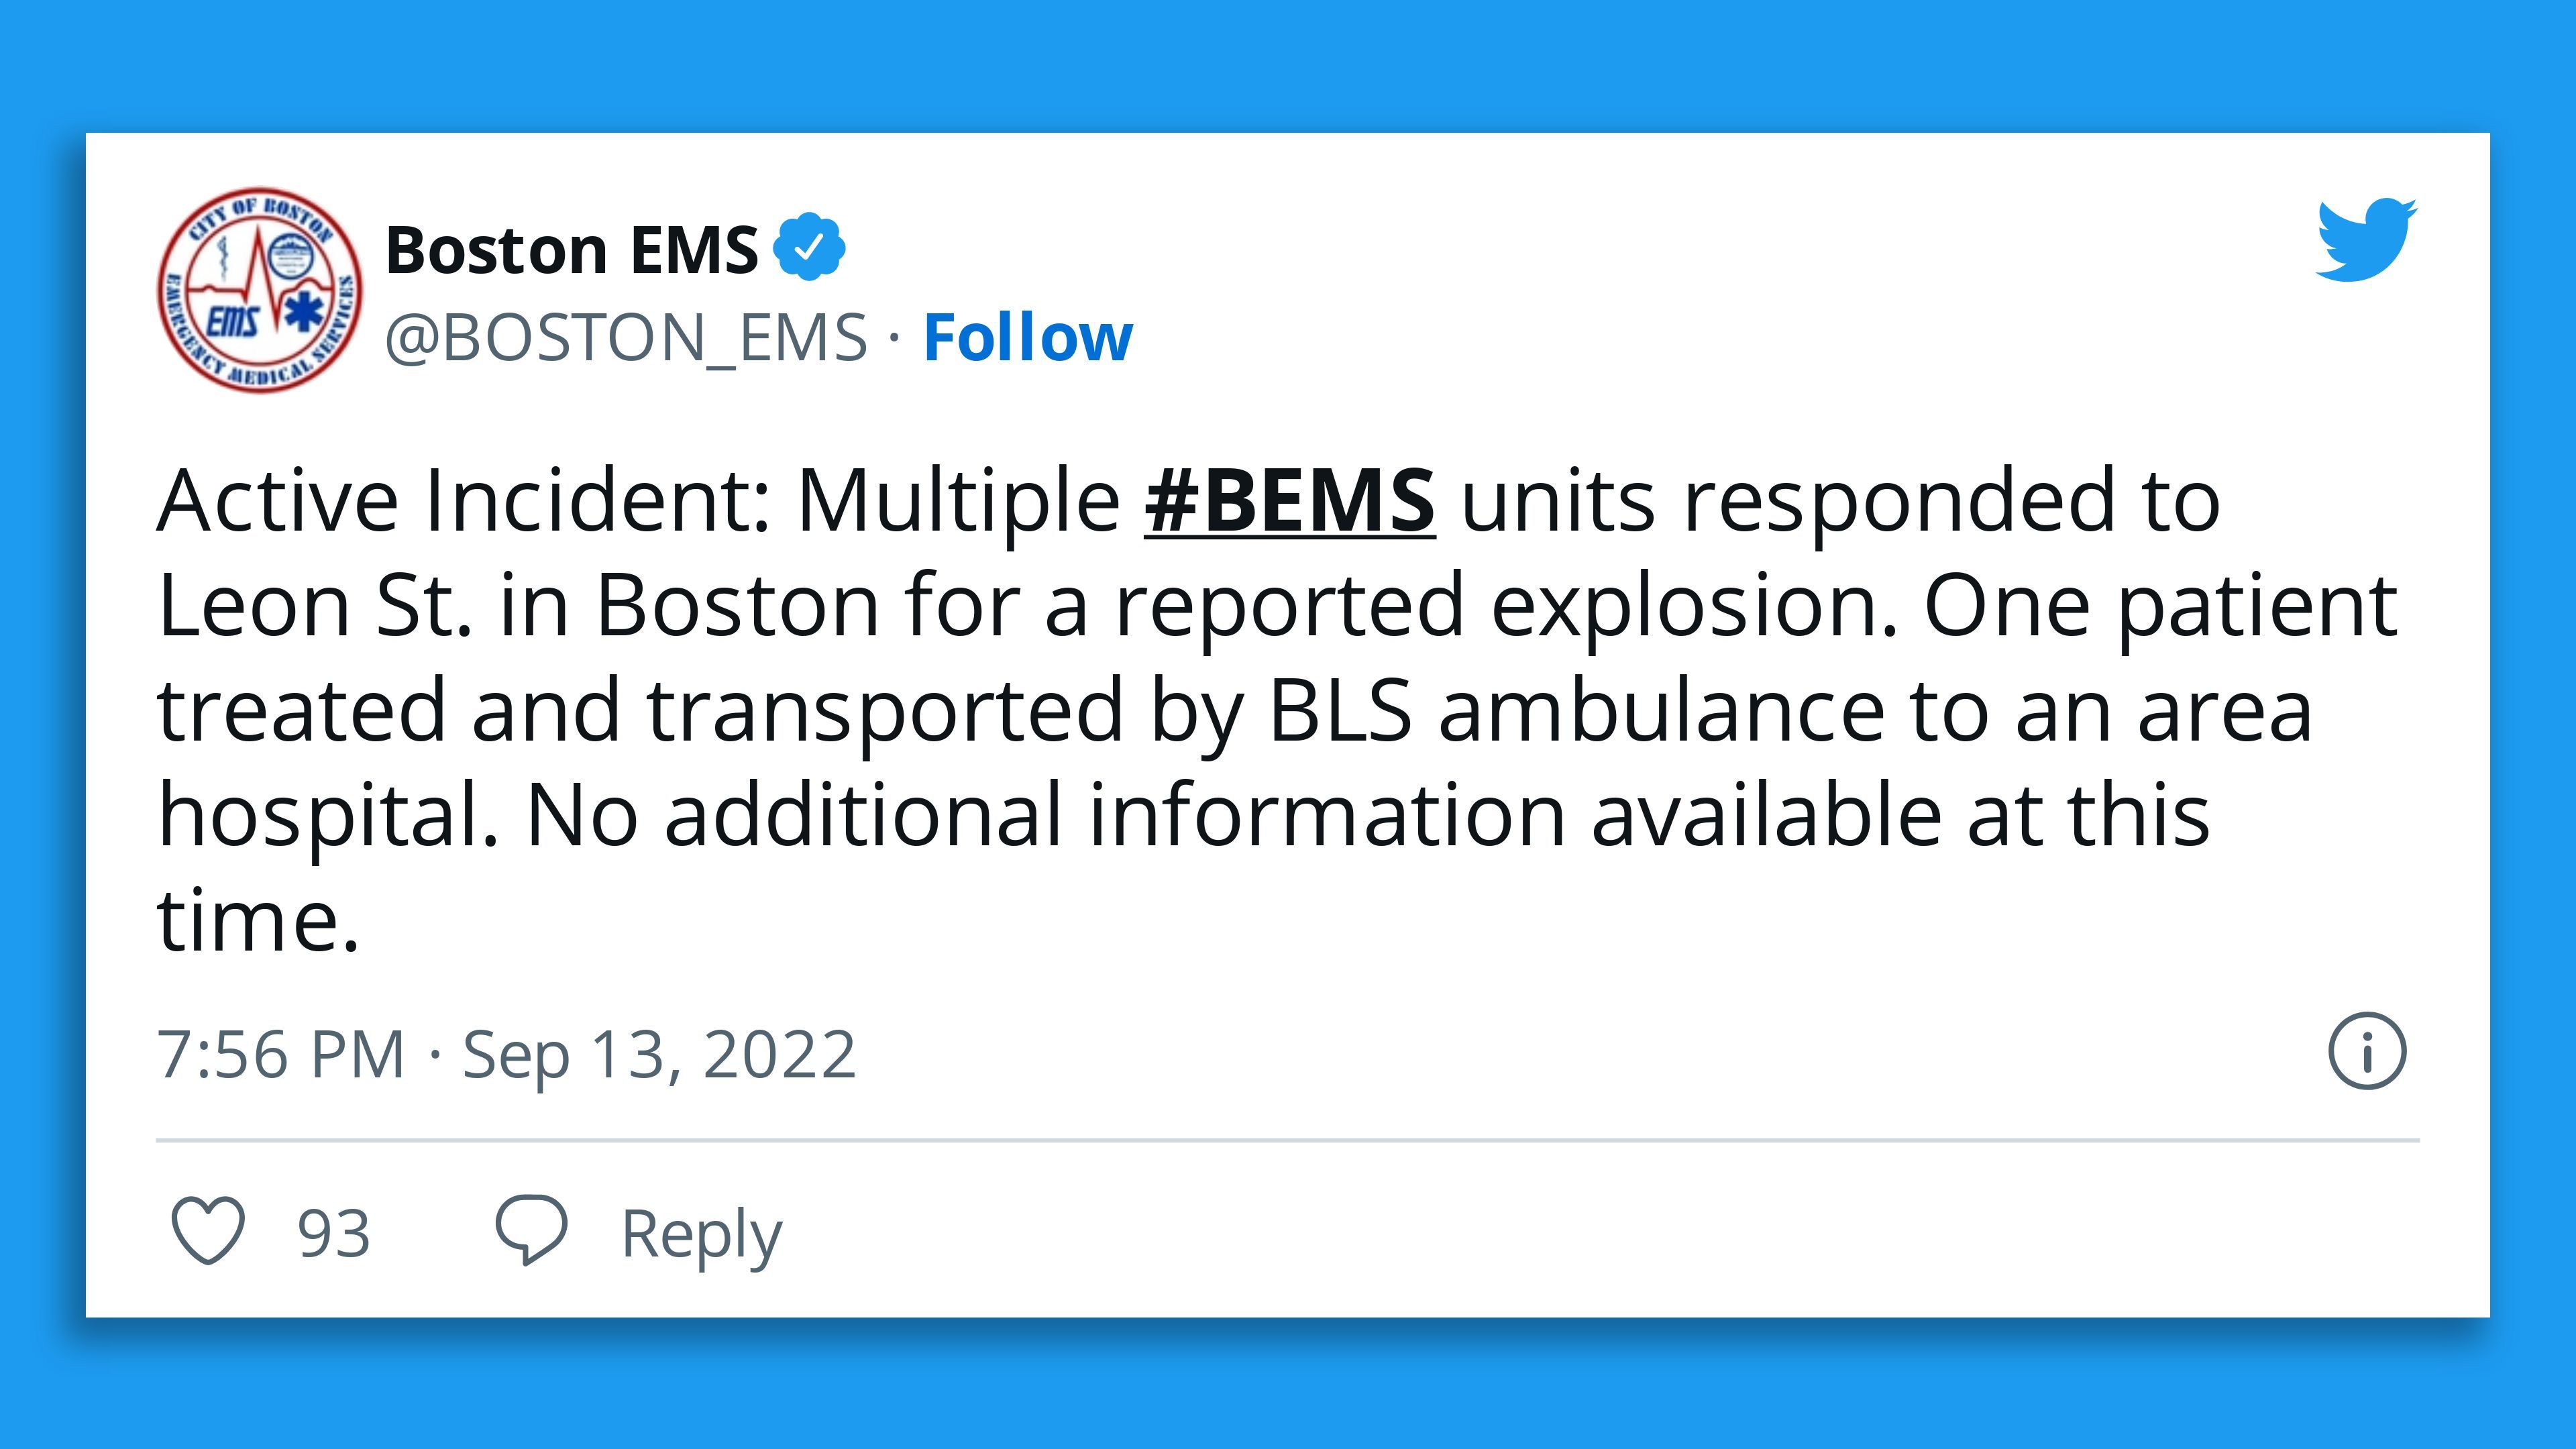 A screenshot of a Boston EMS tweet about responding to reports of an explosion that injured one person at Northeastern University in Boston.